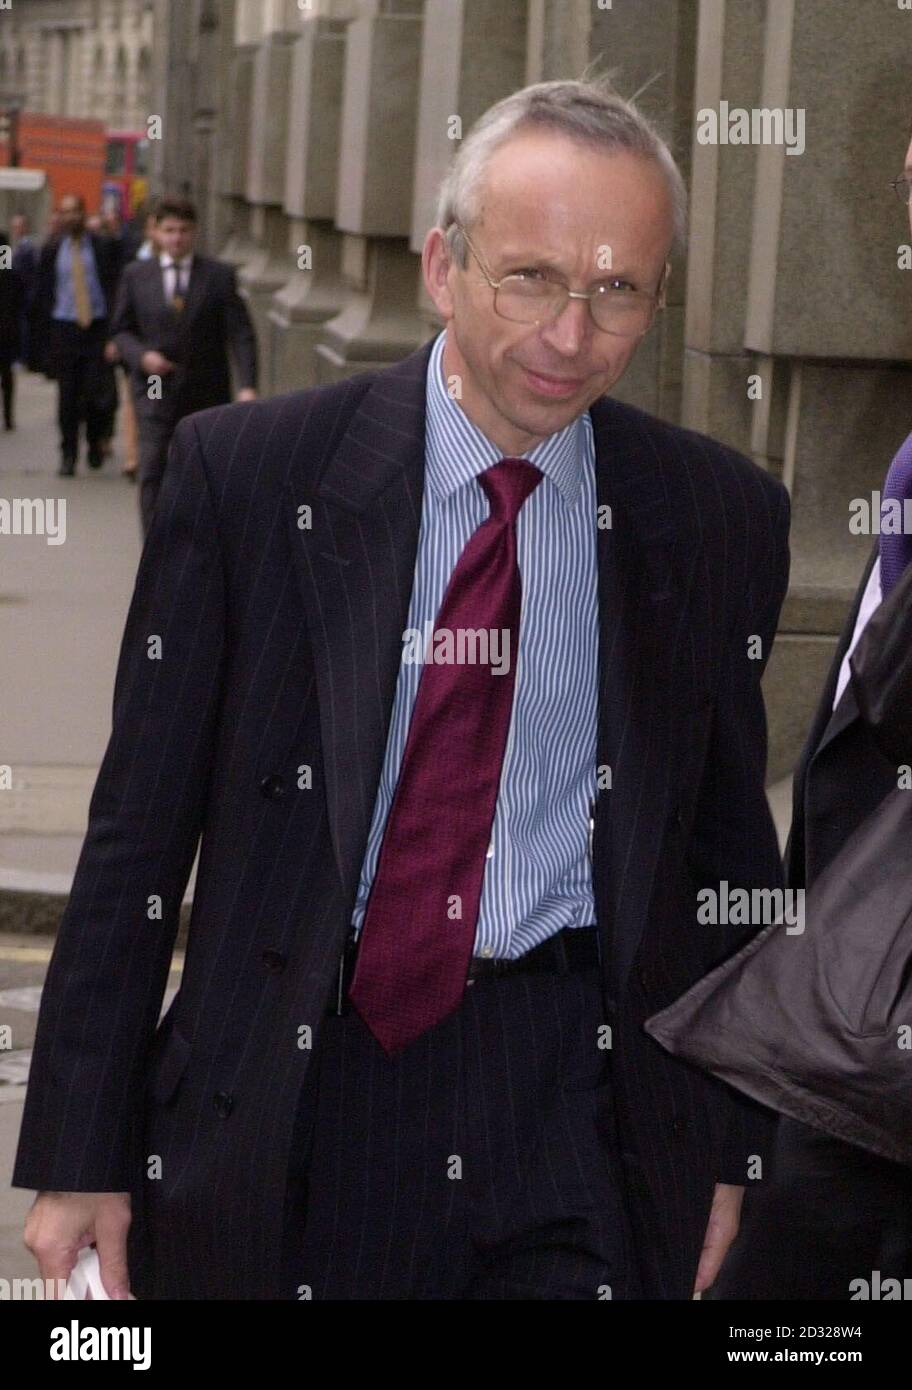 Professor Peter Kopelman, arriving to give evidence at a General Medical Council hearing in London, against Dr Surendra Raizada, 56, and his wife, Dr Sudesh Madan, 52. It is alleged that the pair, both of Prescott, Merseyside, ran a dieting and slimming clinic.  * ... throughout the north west and Wales,  where they sold the powerful appetite suppressant Duromine, after it was withdrawn from the market due to undesirable side effects. Prof Kopelman, who has been running obesity clinics for 21 years, claimed the couple's professional conduct had fallen short of the standards expected and they h Stock Photo